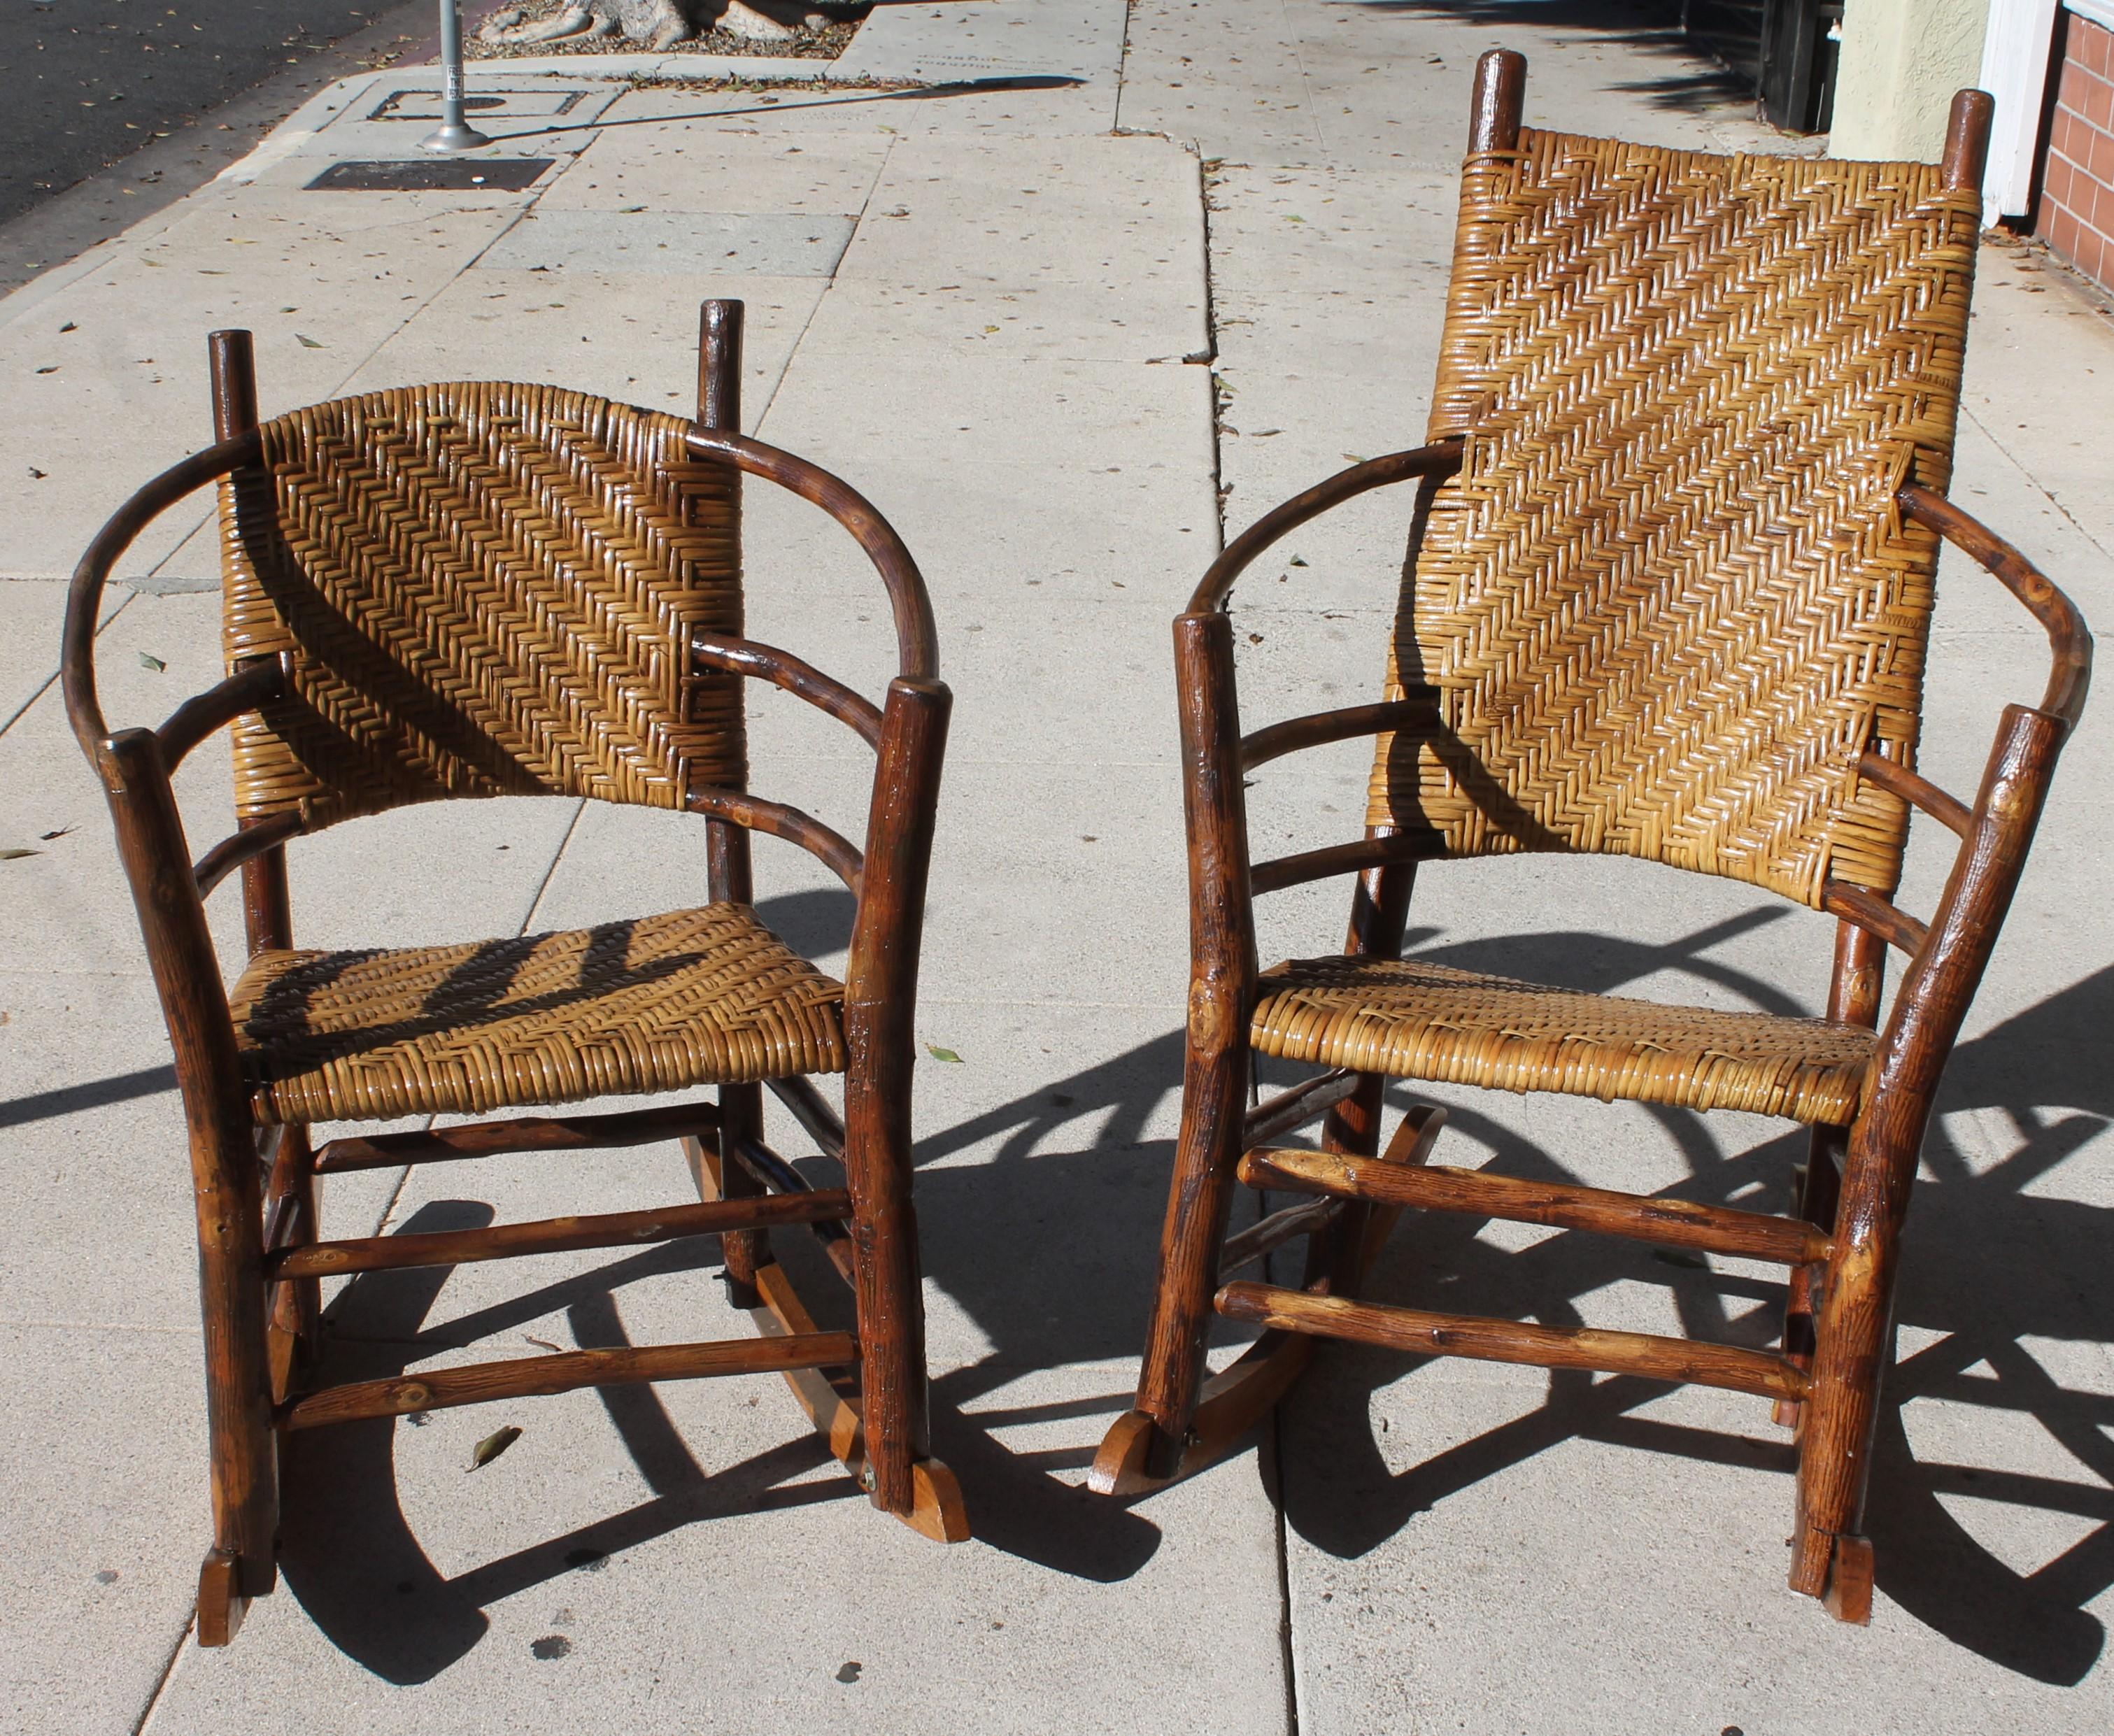 These two amazing stamped Old Hickory Rocking chairs are in fine condition and coated with all weather protector boat varnish for durability. They are in original condition with the original hand woven seats and backs. These were hand crafted at the